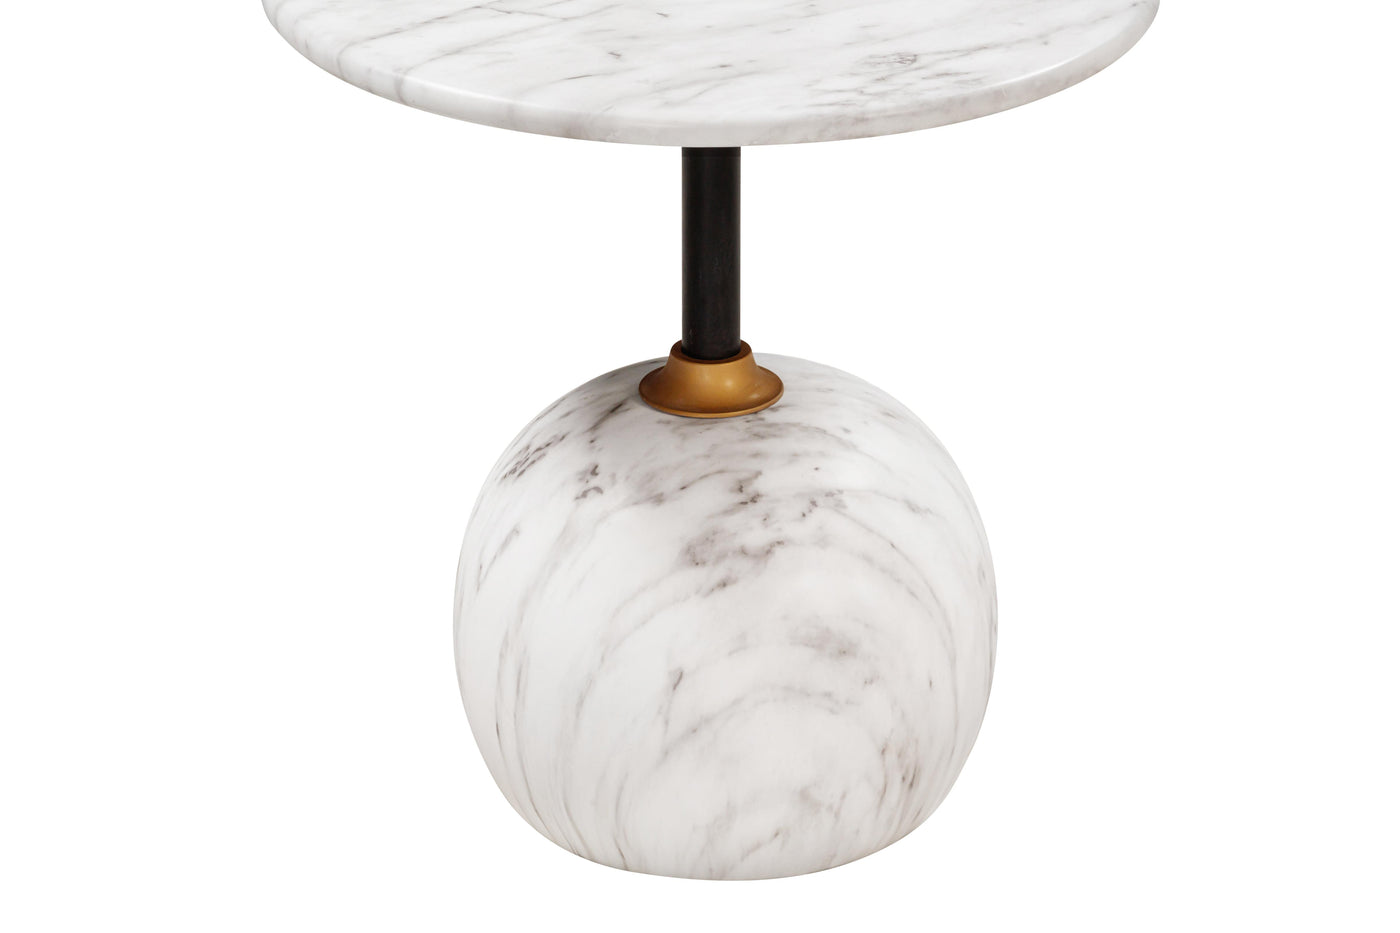 Luxxa Side Table Marble Finish